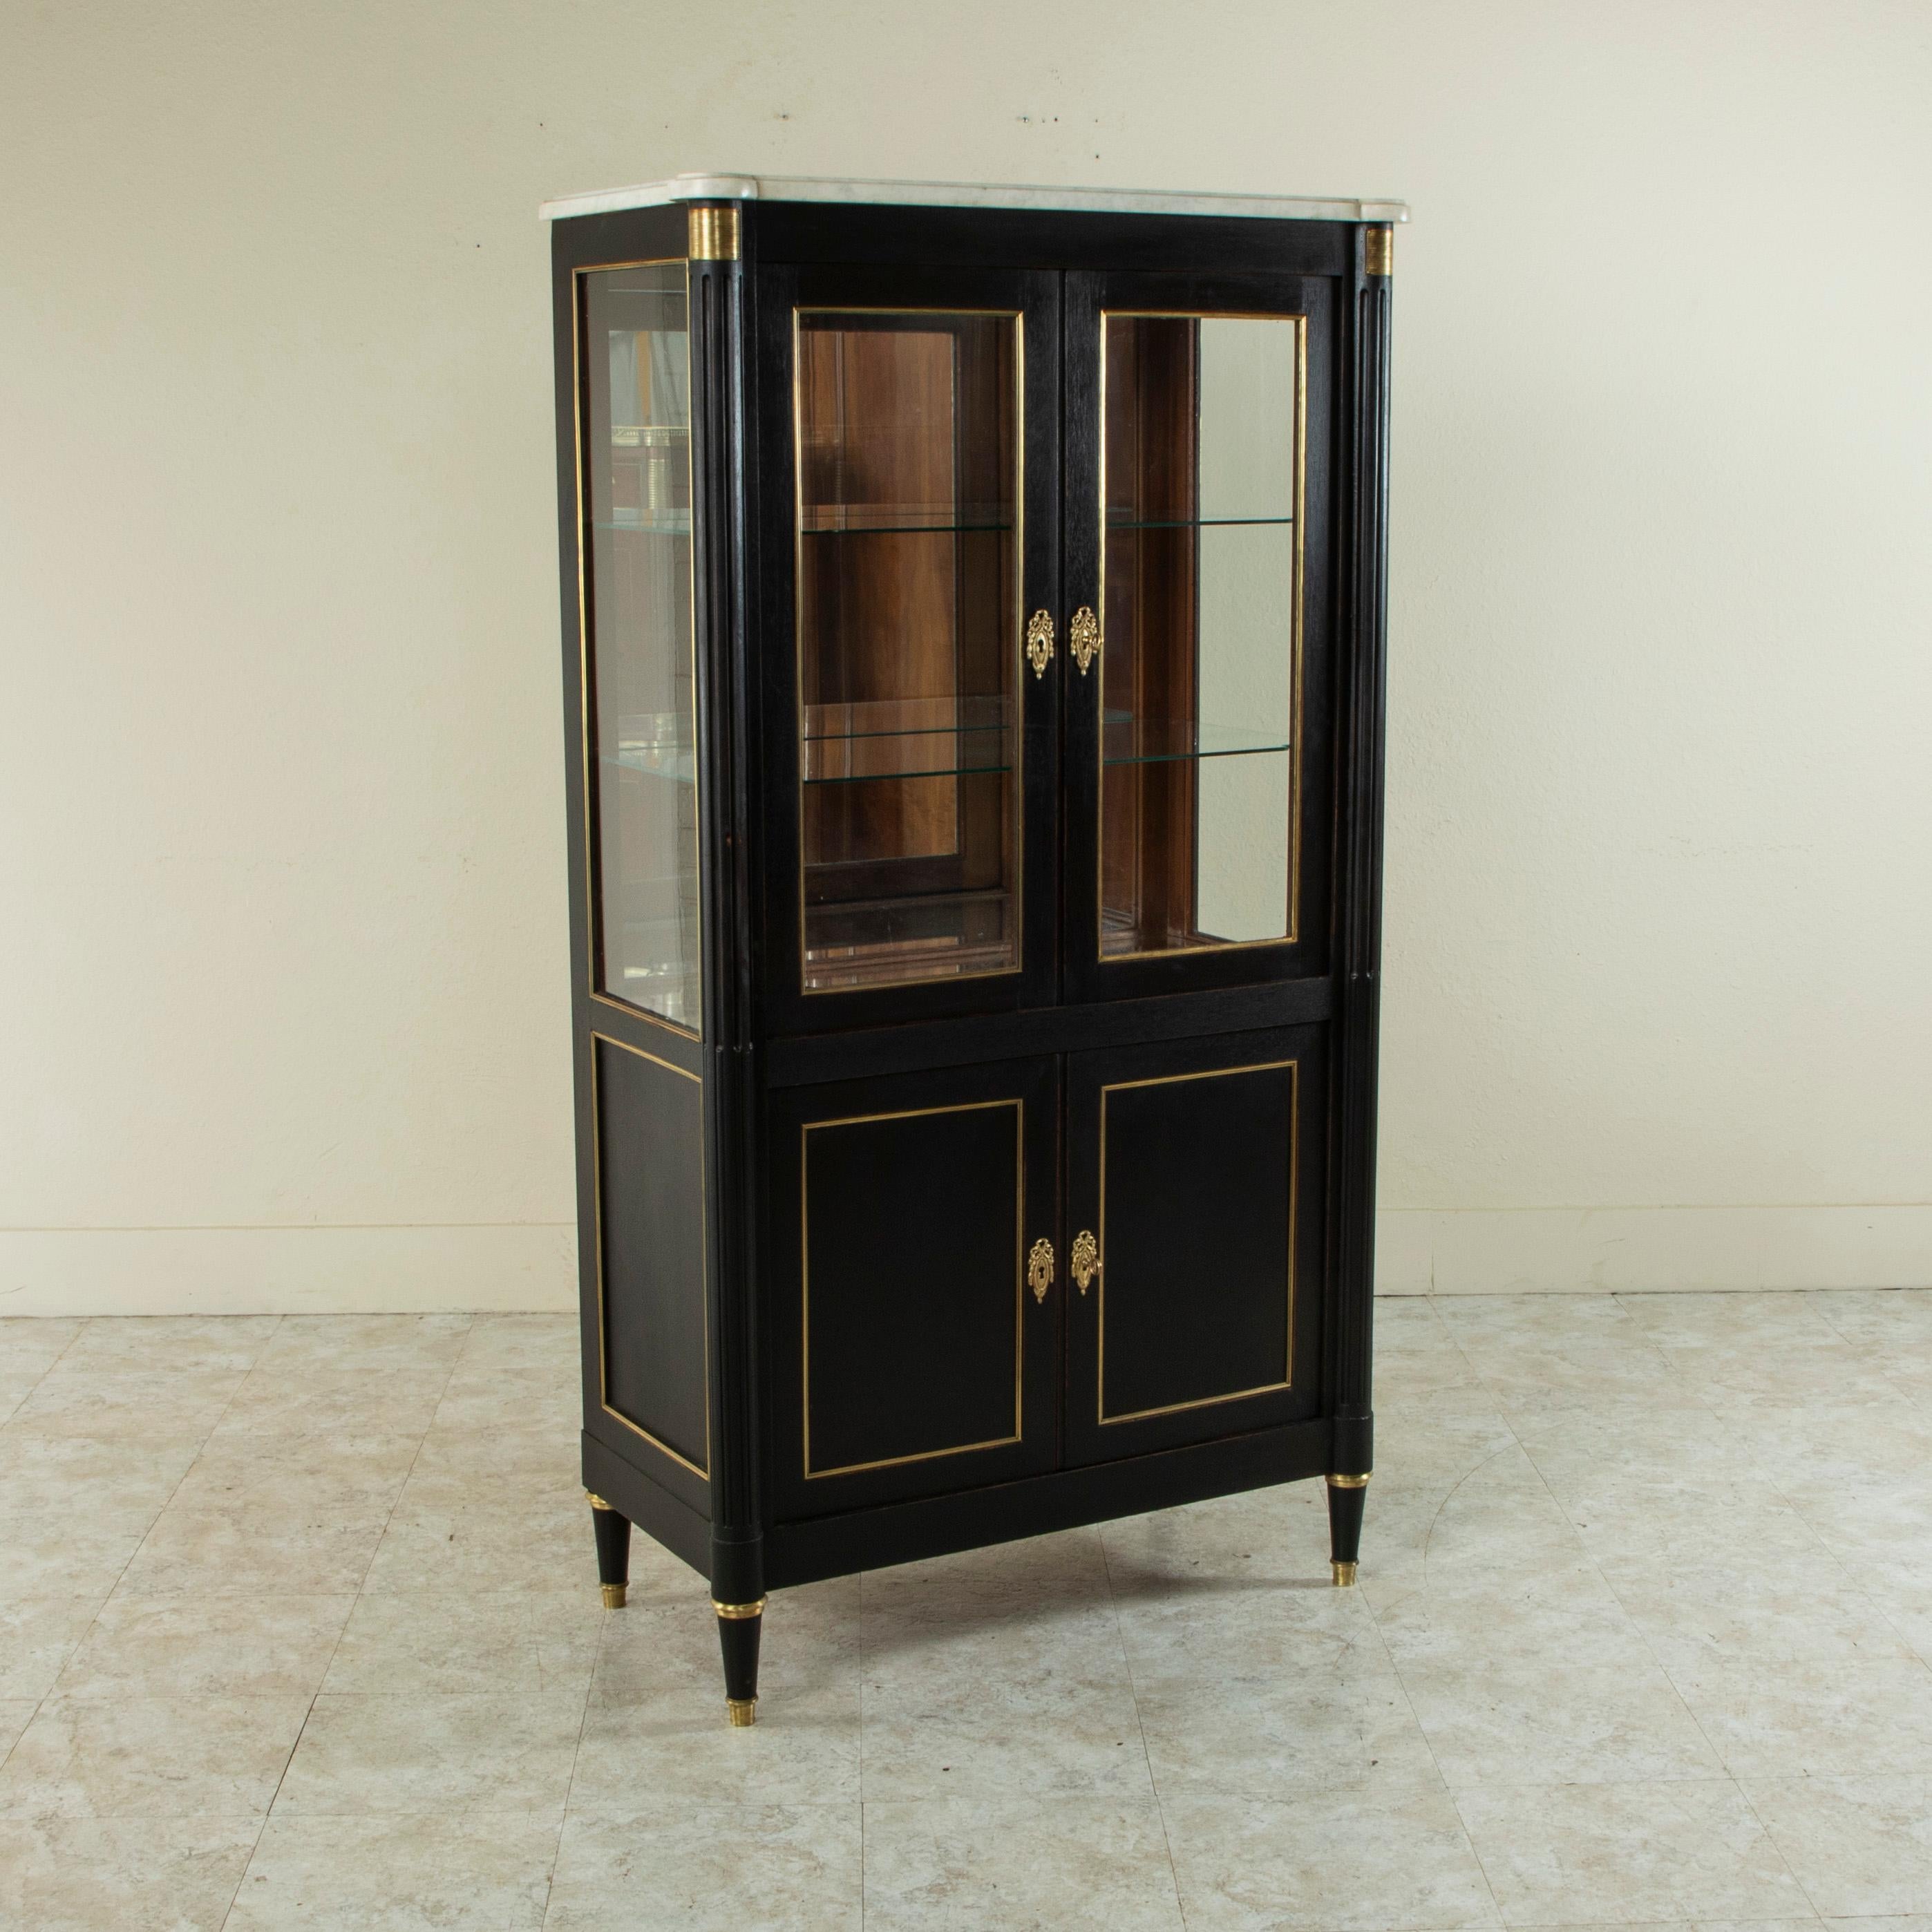 This early twentieth century French Louis XVI style painted black vitrine features glass on three sides and a beveled white marble top. Two upper glass doors open to reveal an interior with two glass shelves. The back and bottom platform of the